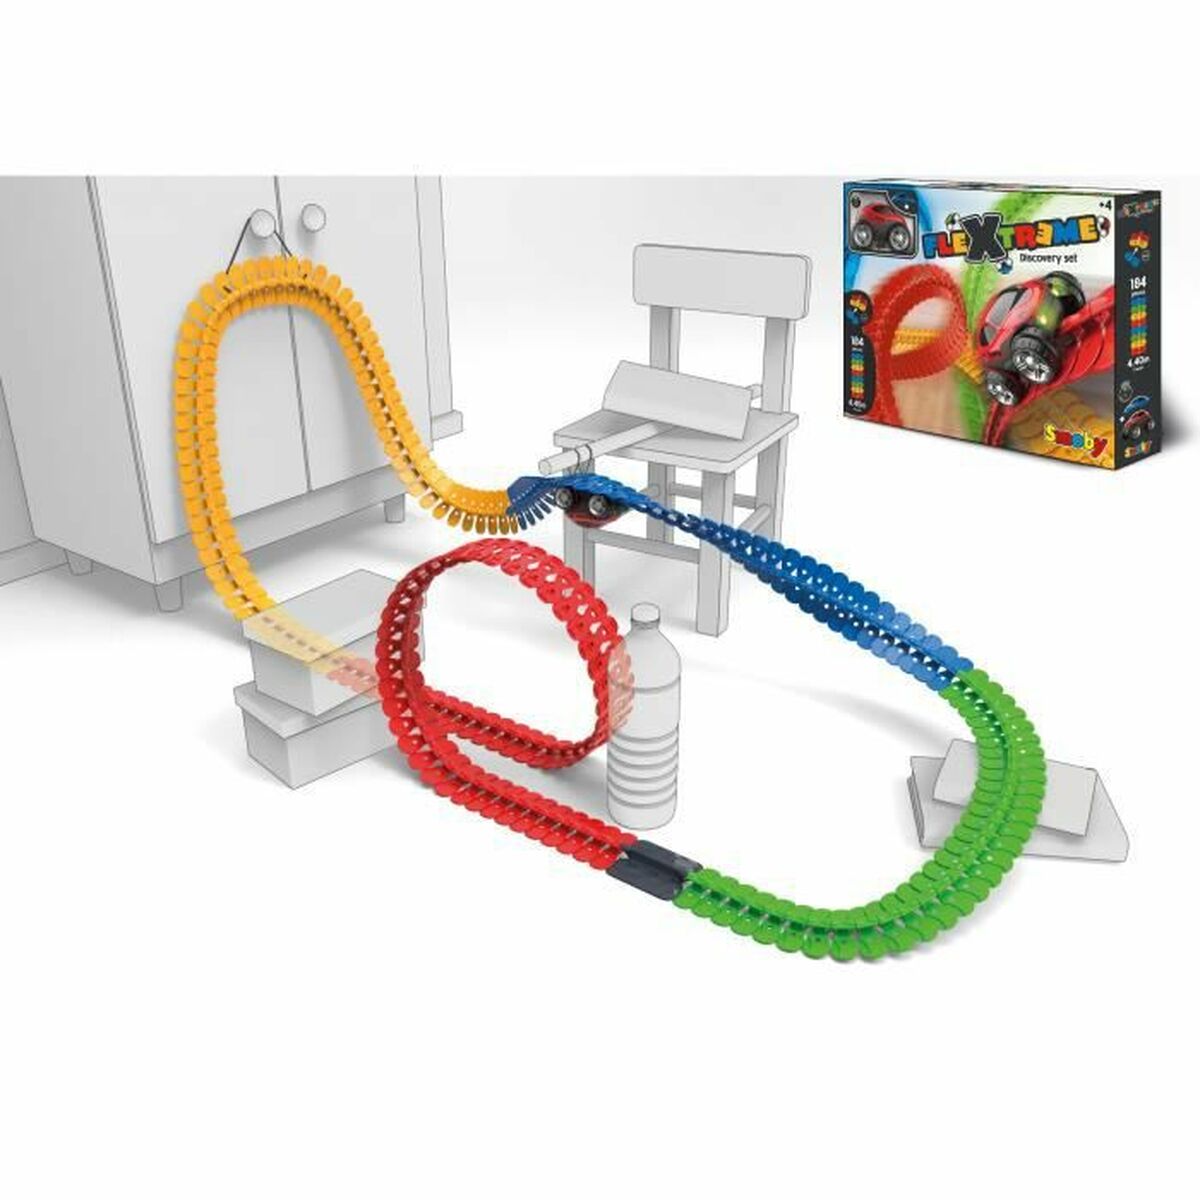 Racetrack Smoby FleXtreme Discovery Set